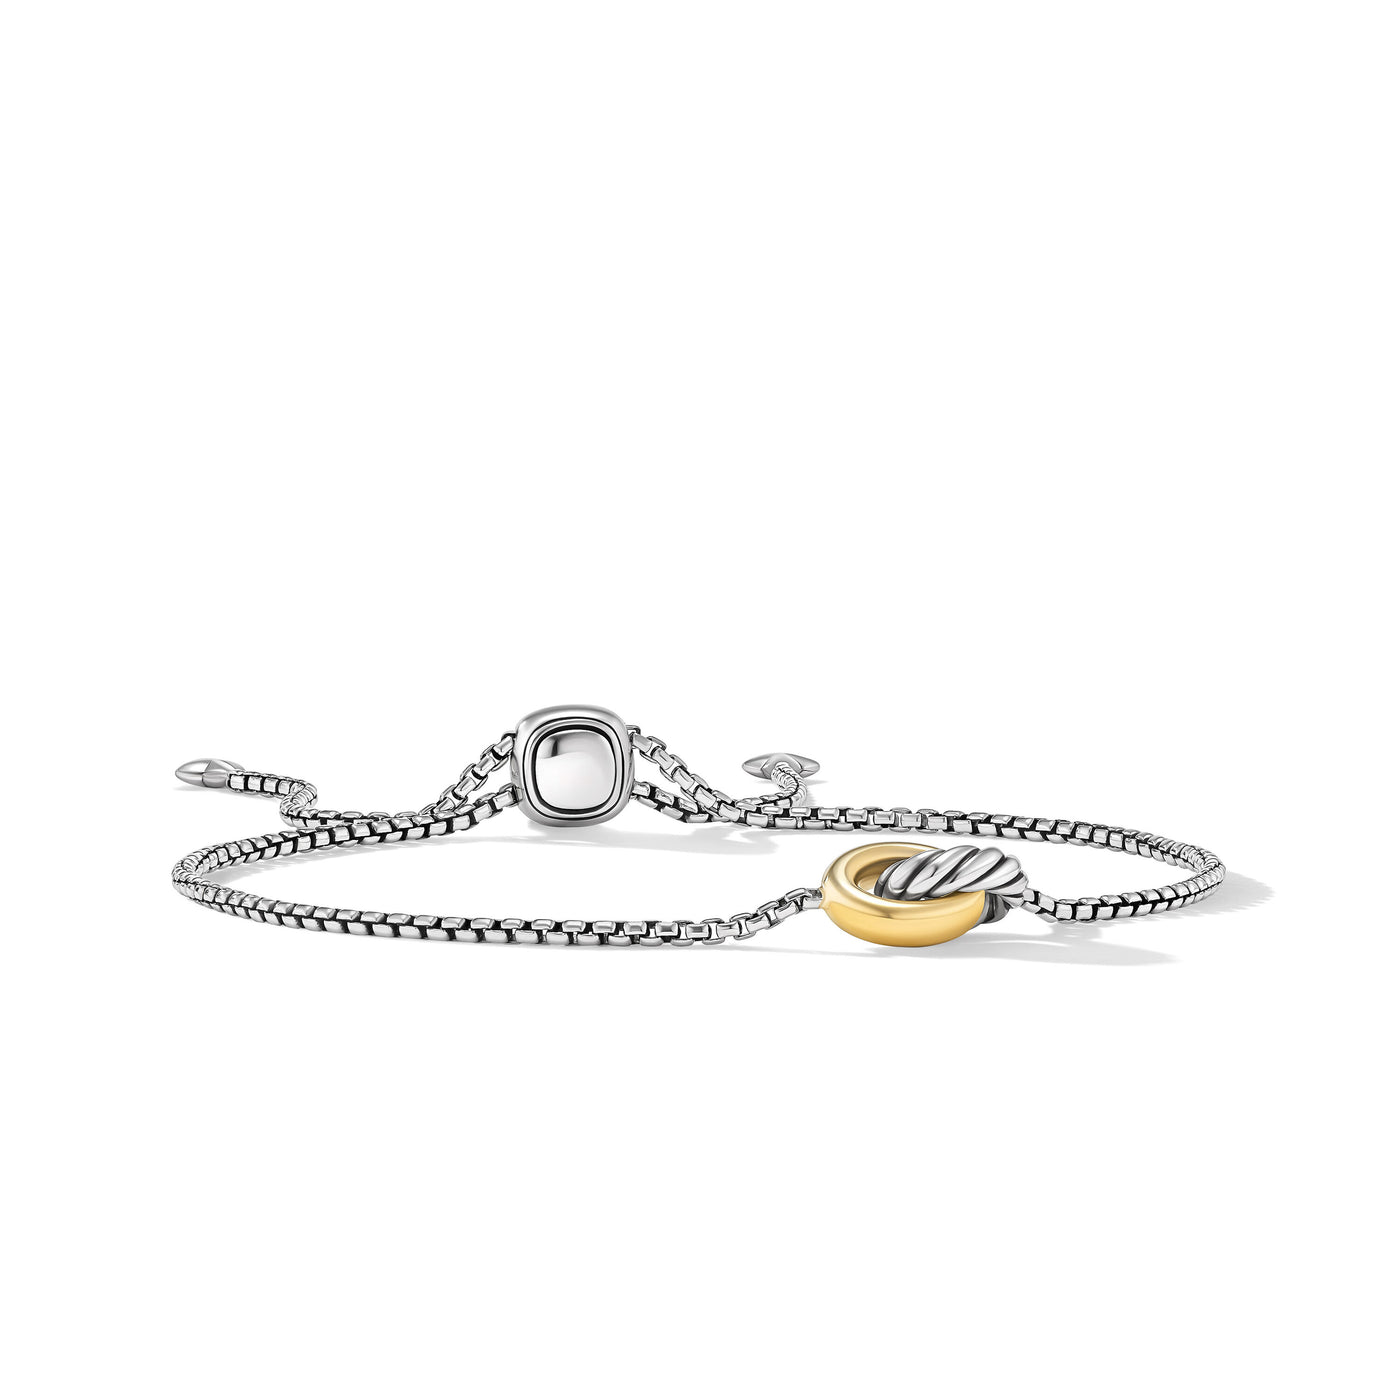 Petite Cable Linked Bracelet in Sterling Silver with 14K Yellow Gold\, 15mm